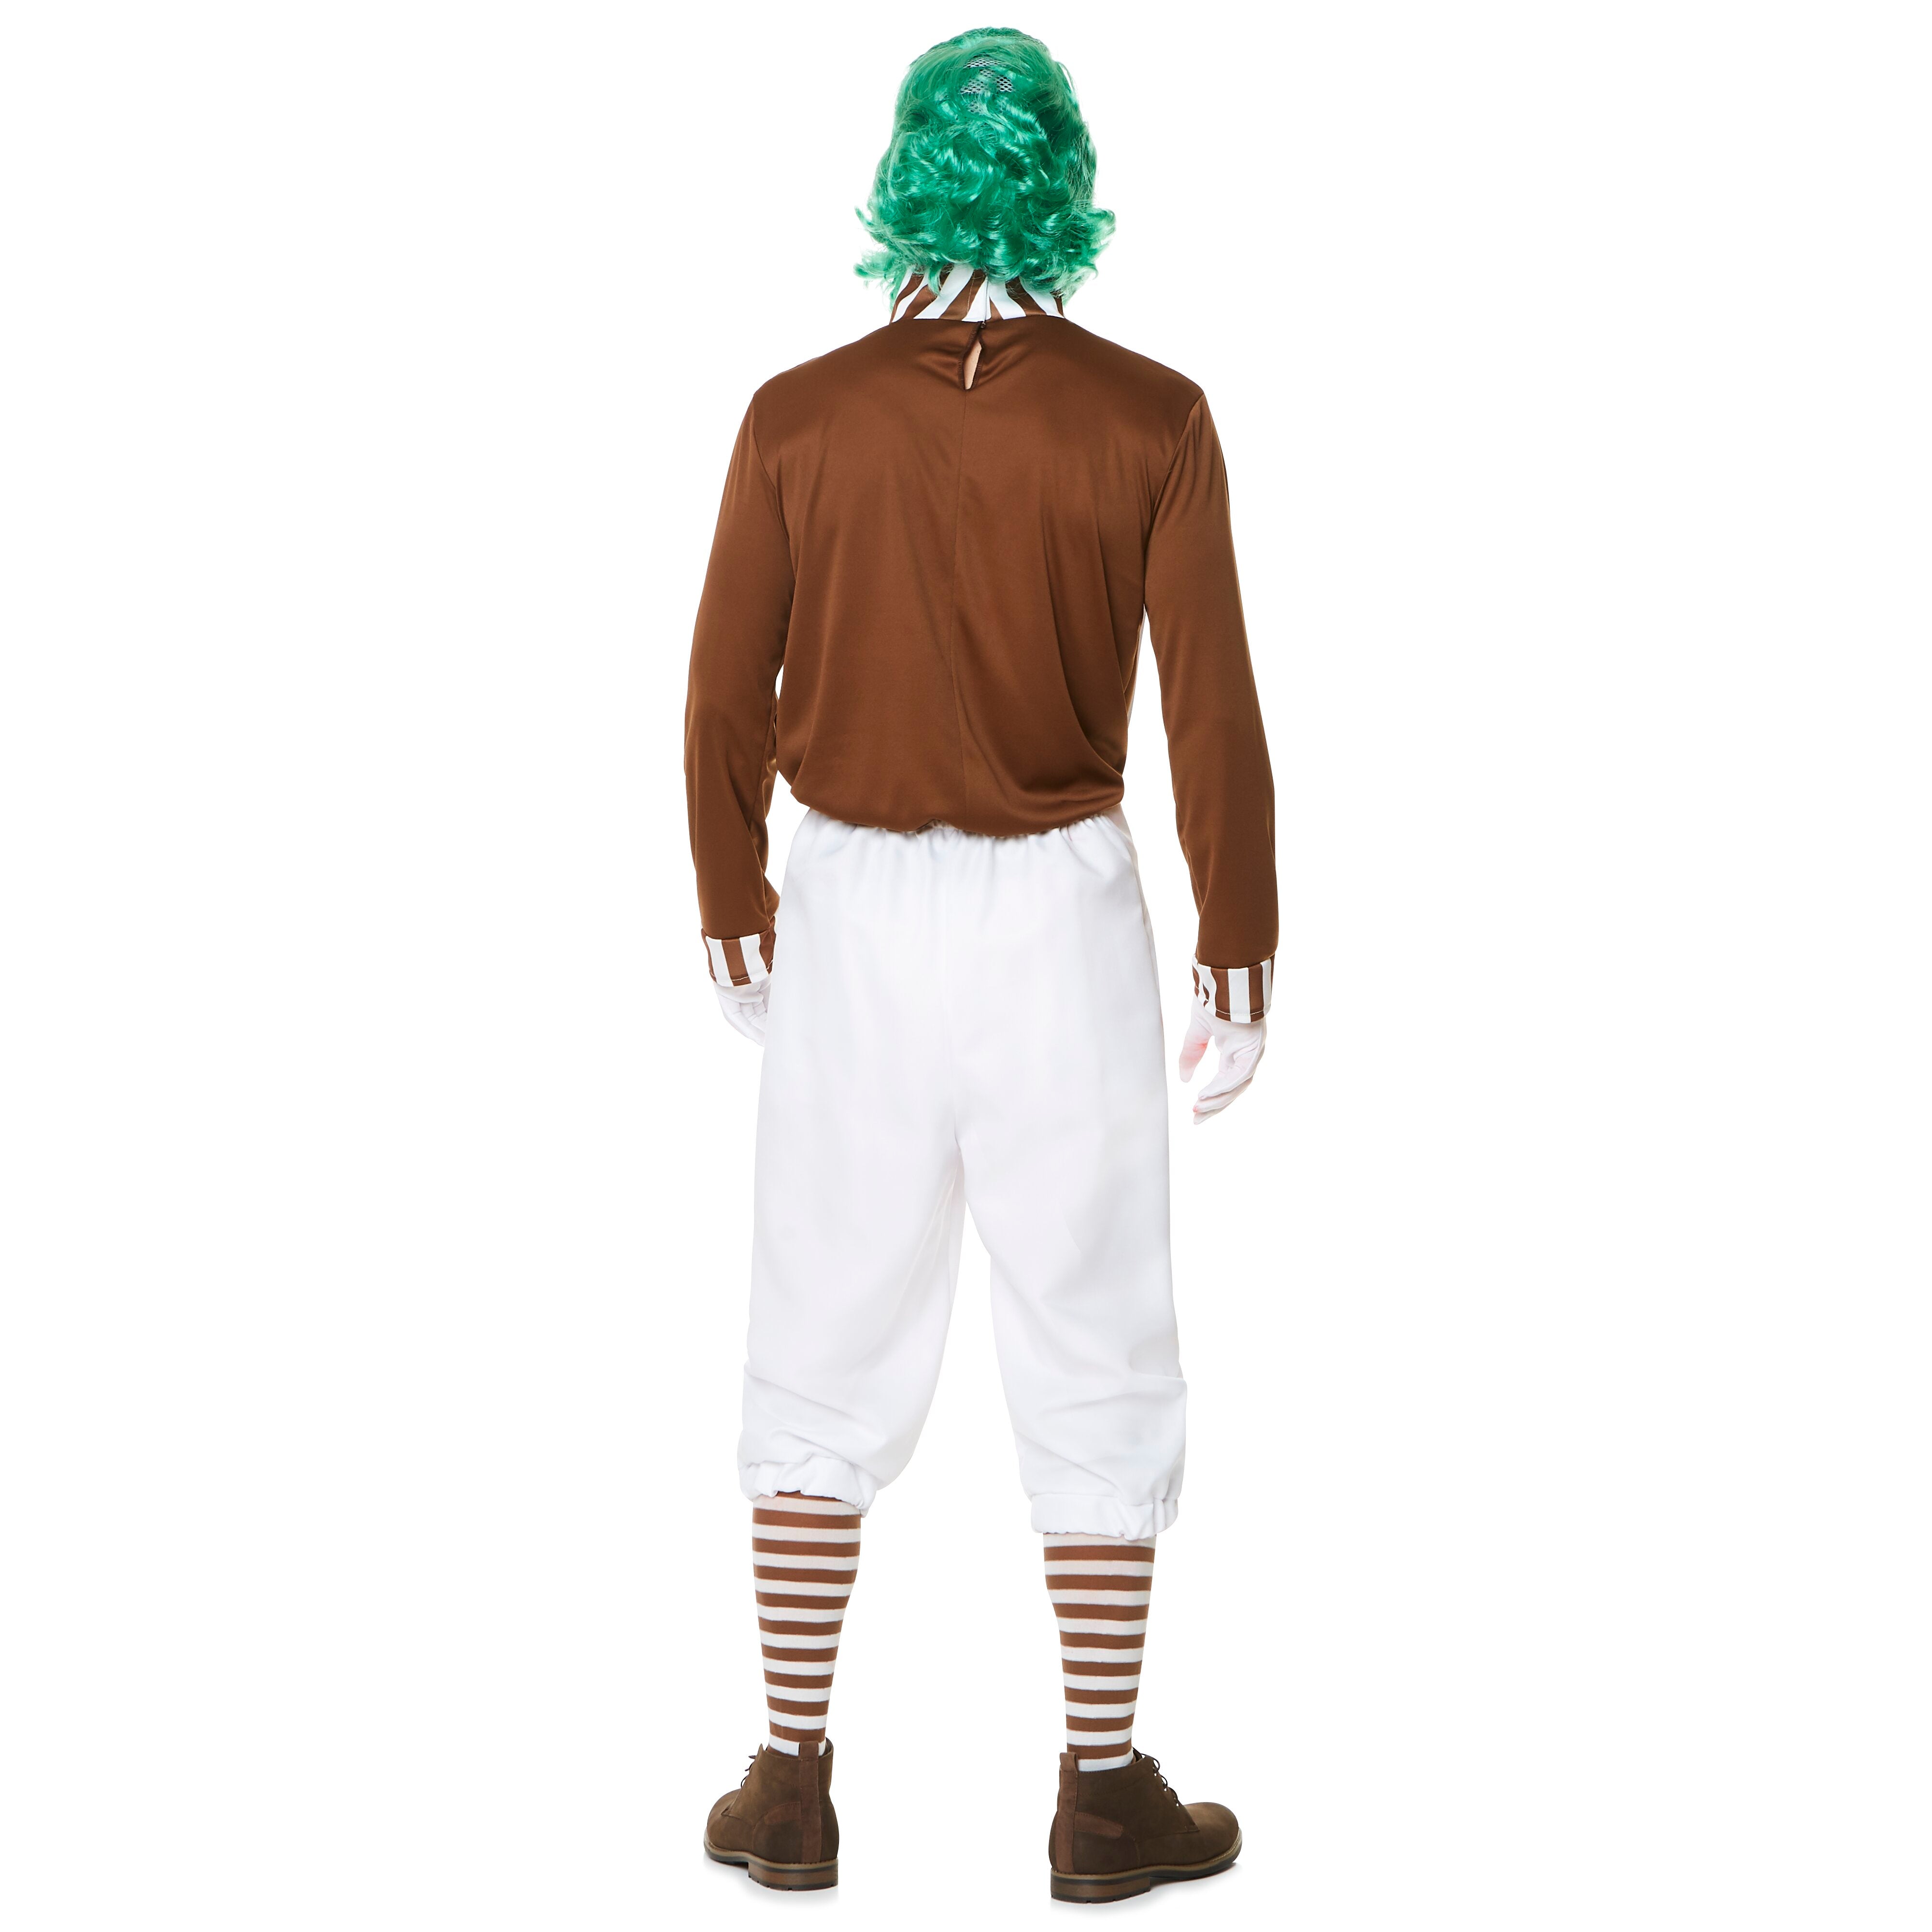 Deluxe Chocolate Factory Worker Adult Costume